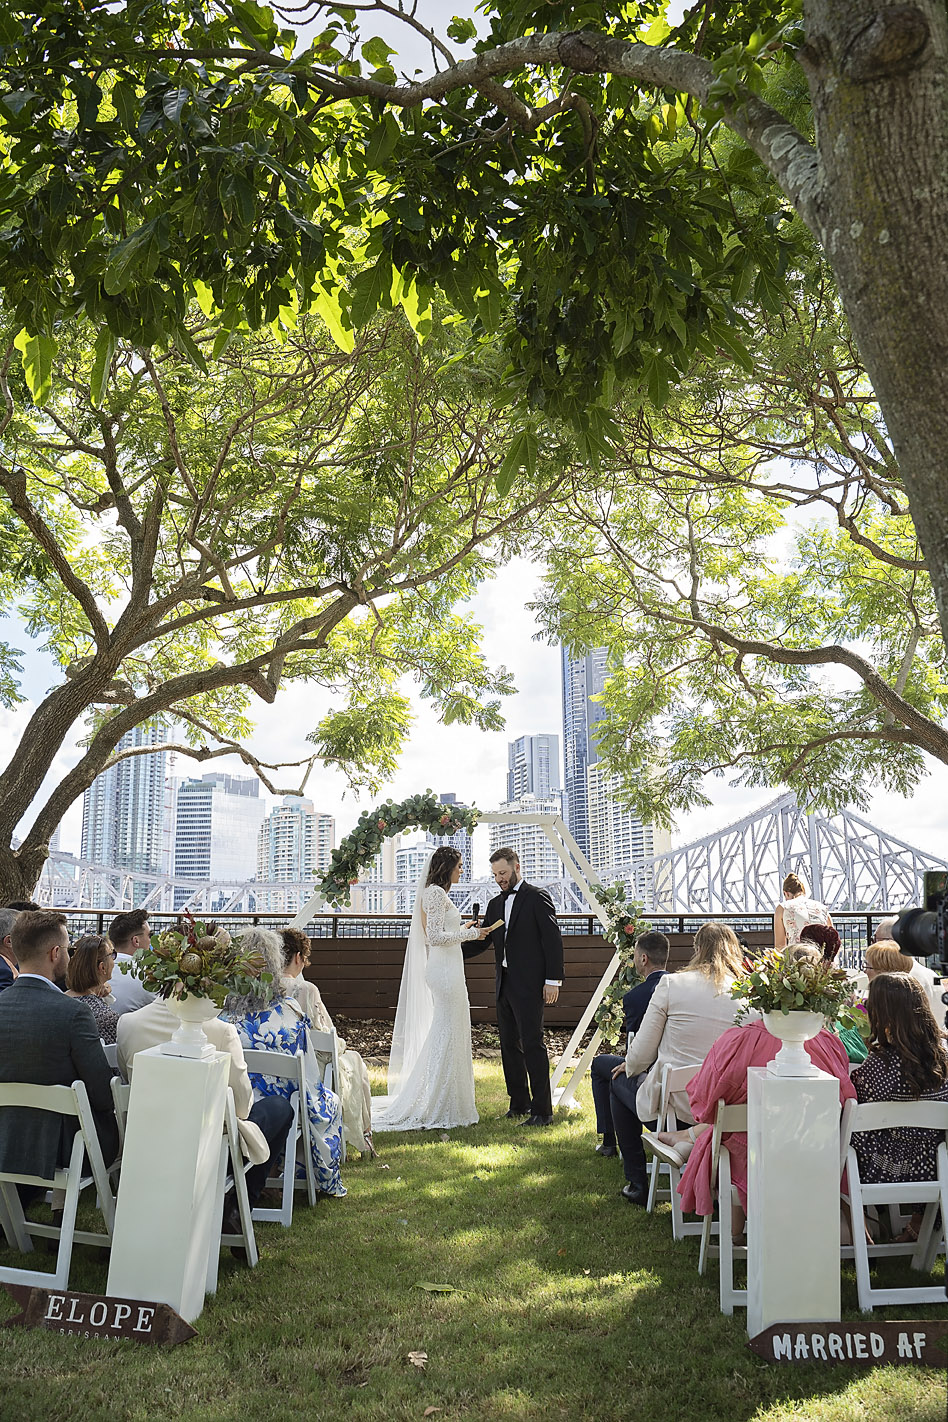 Elope Brisbane with city views - an all inclusive package for a stress-free wedding